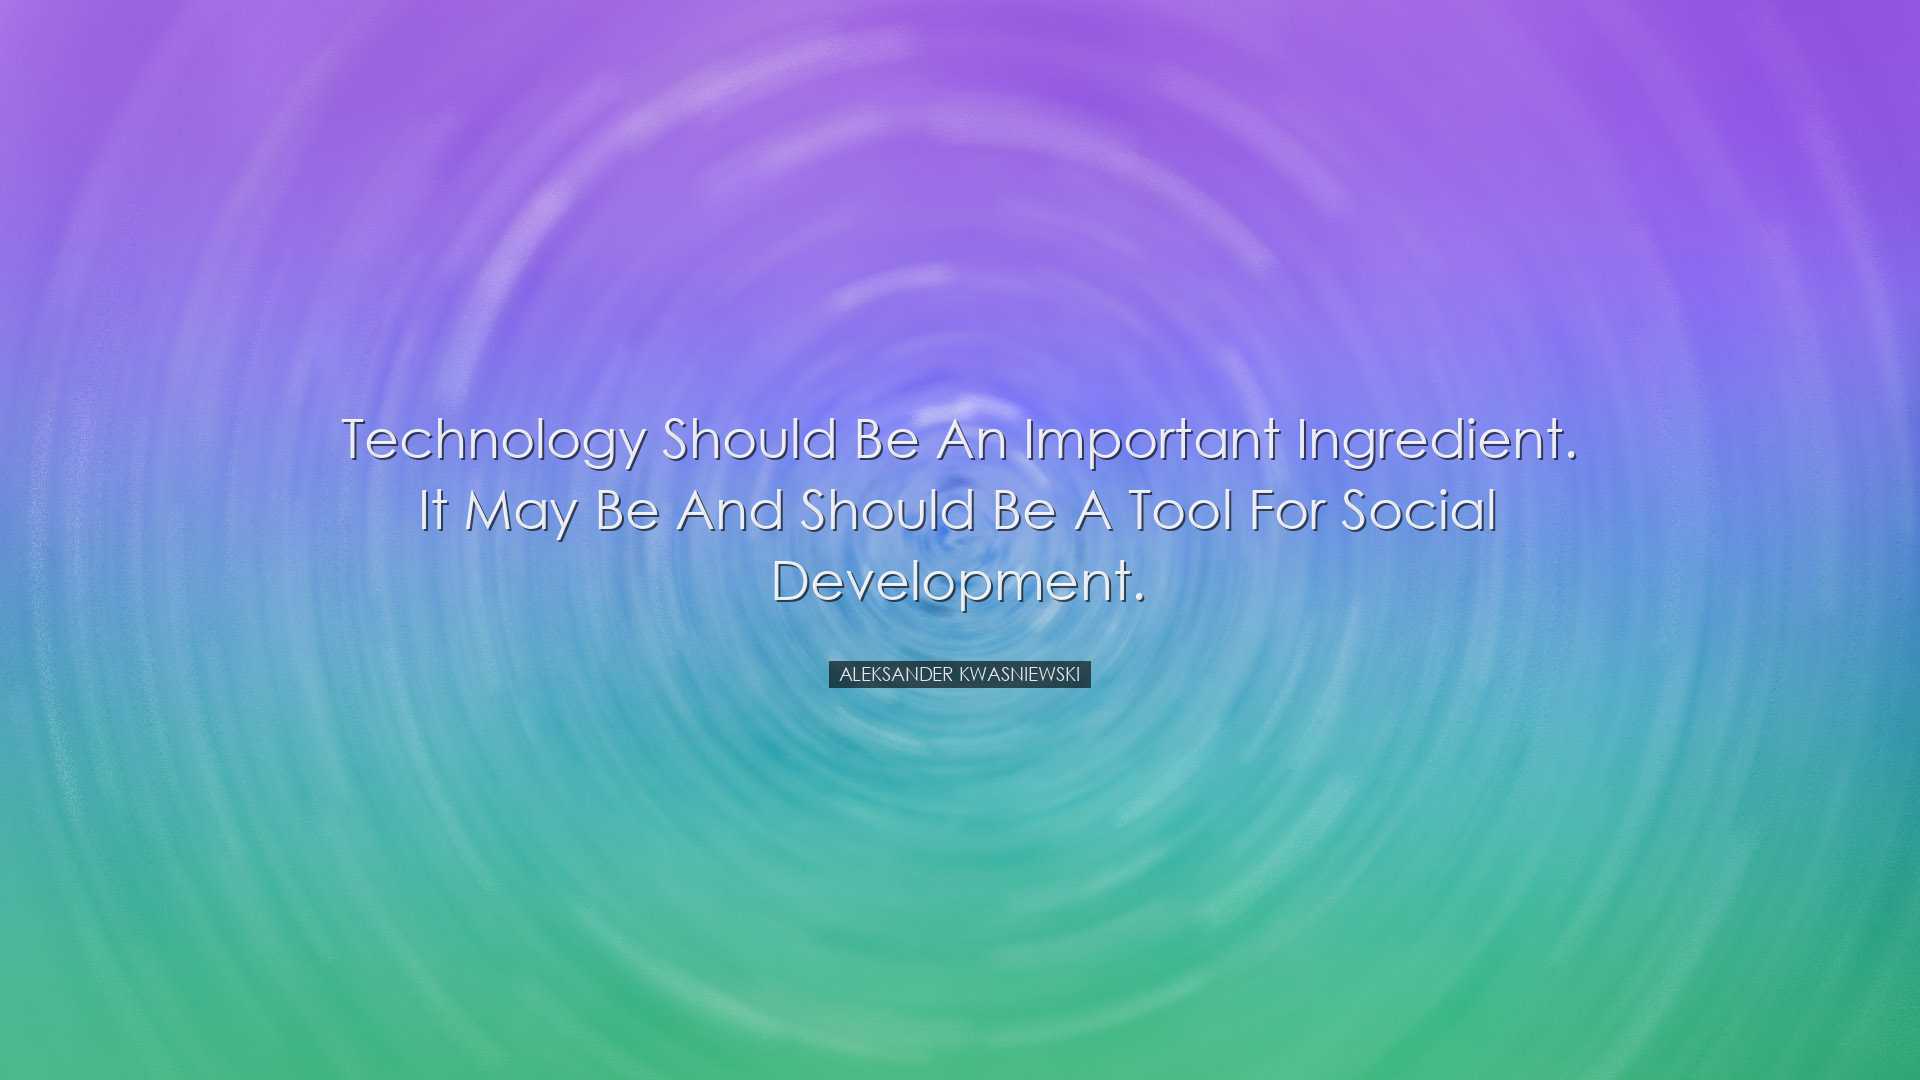 Technology should be an important ingredient. It may be and should